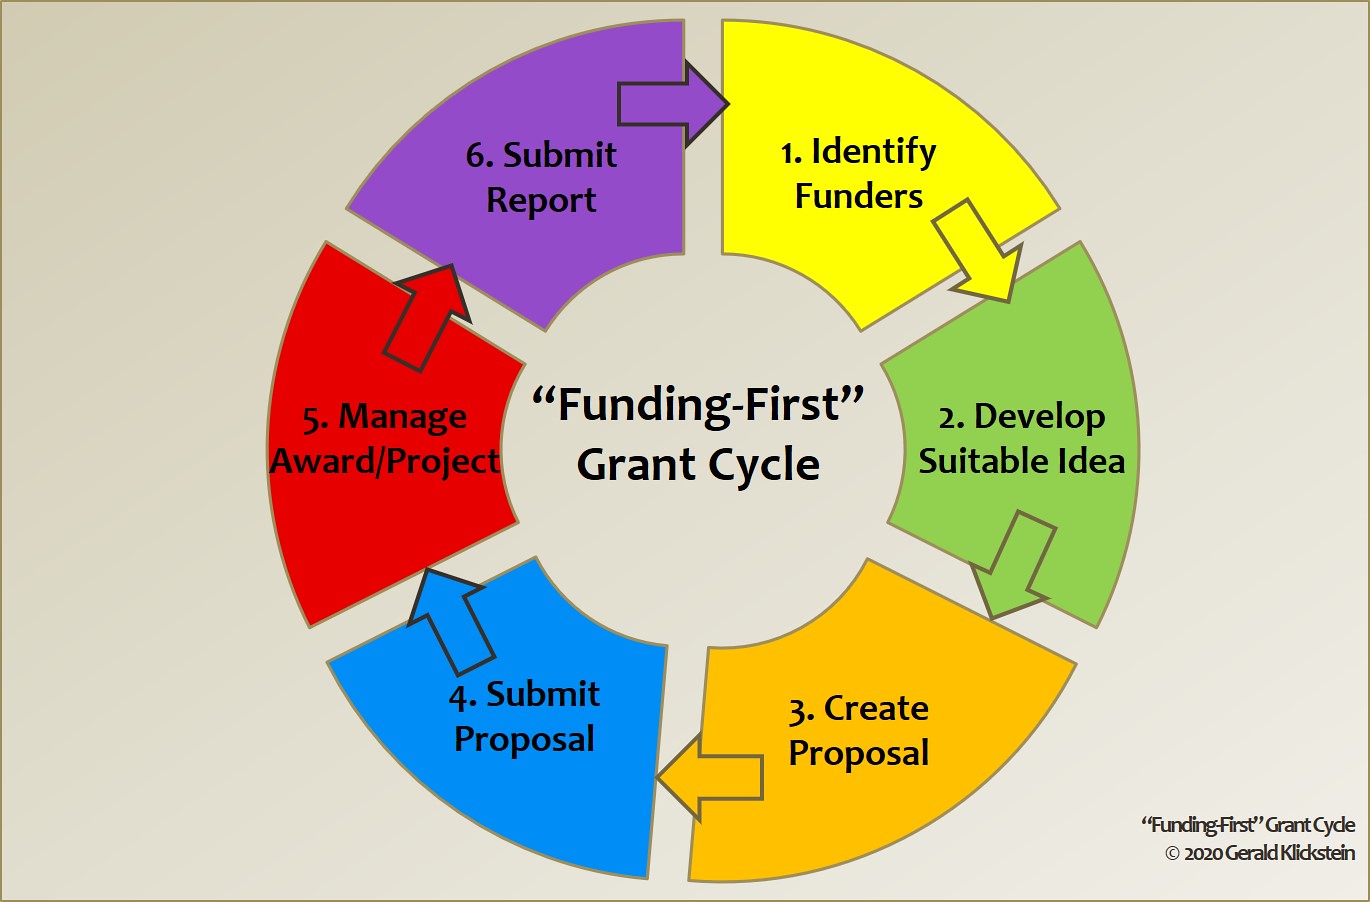 The “Funding-First” Grant Cycle